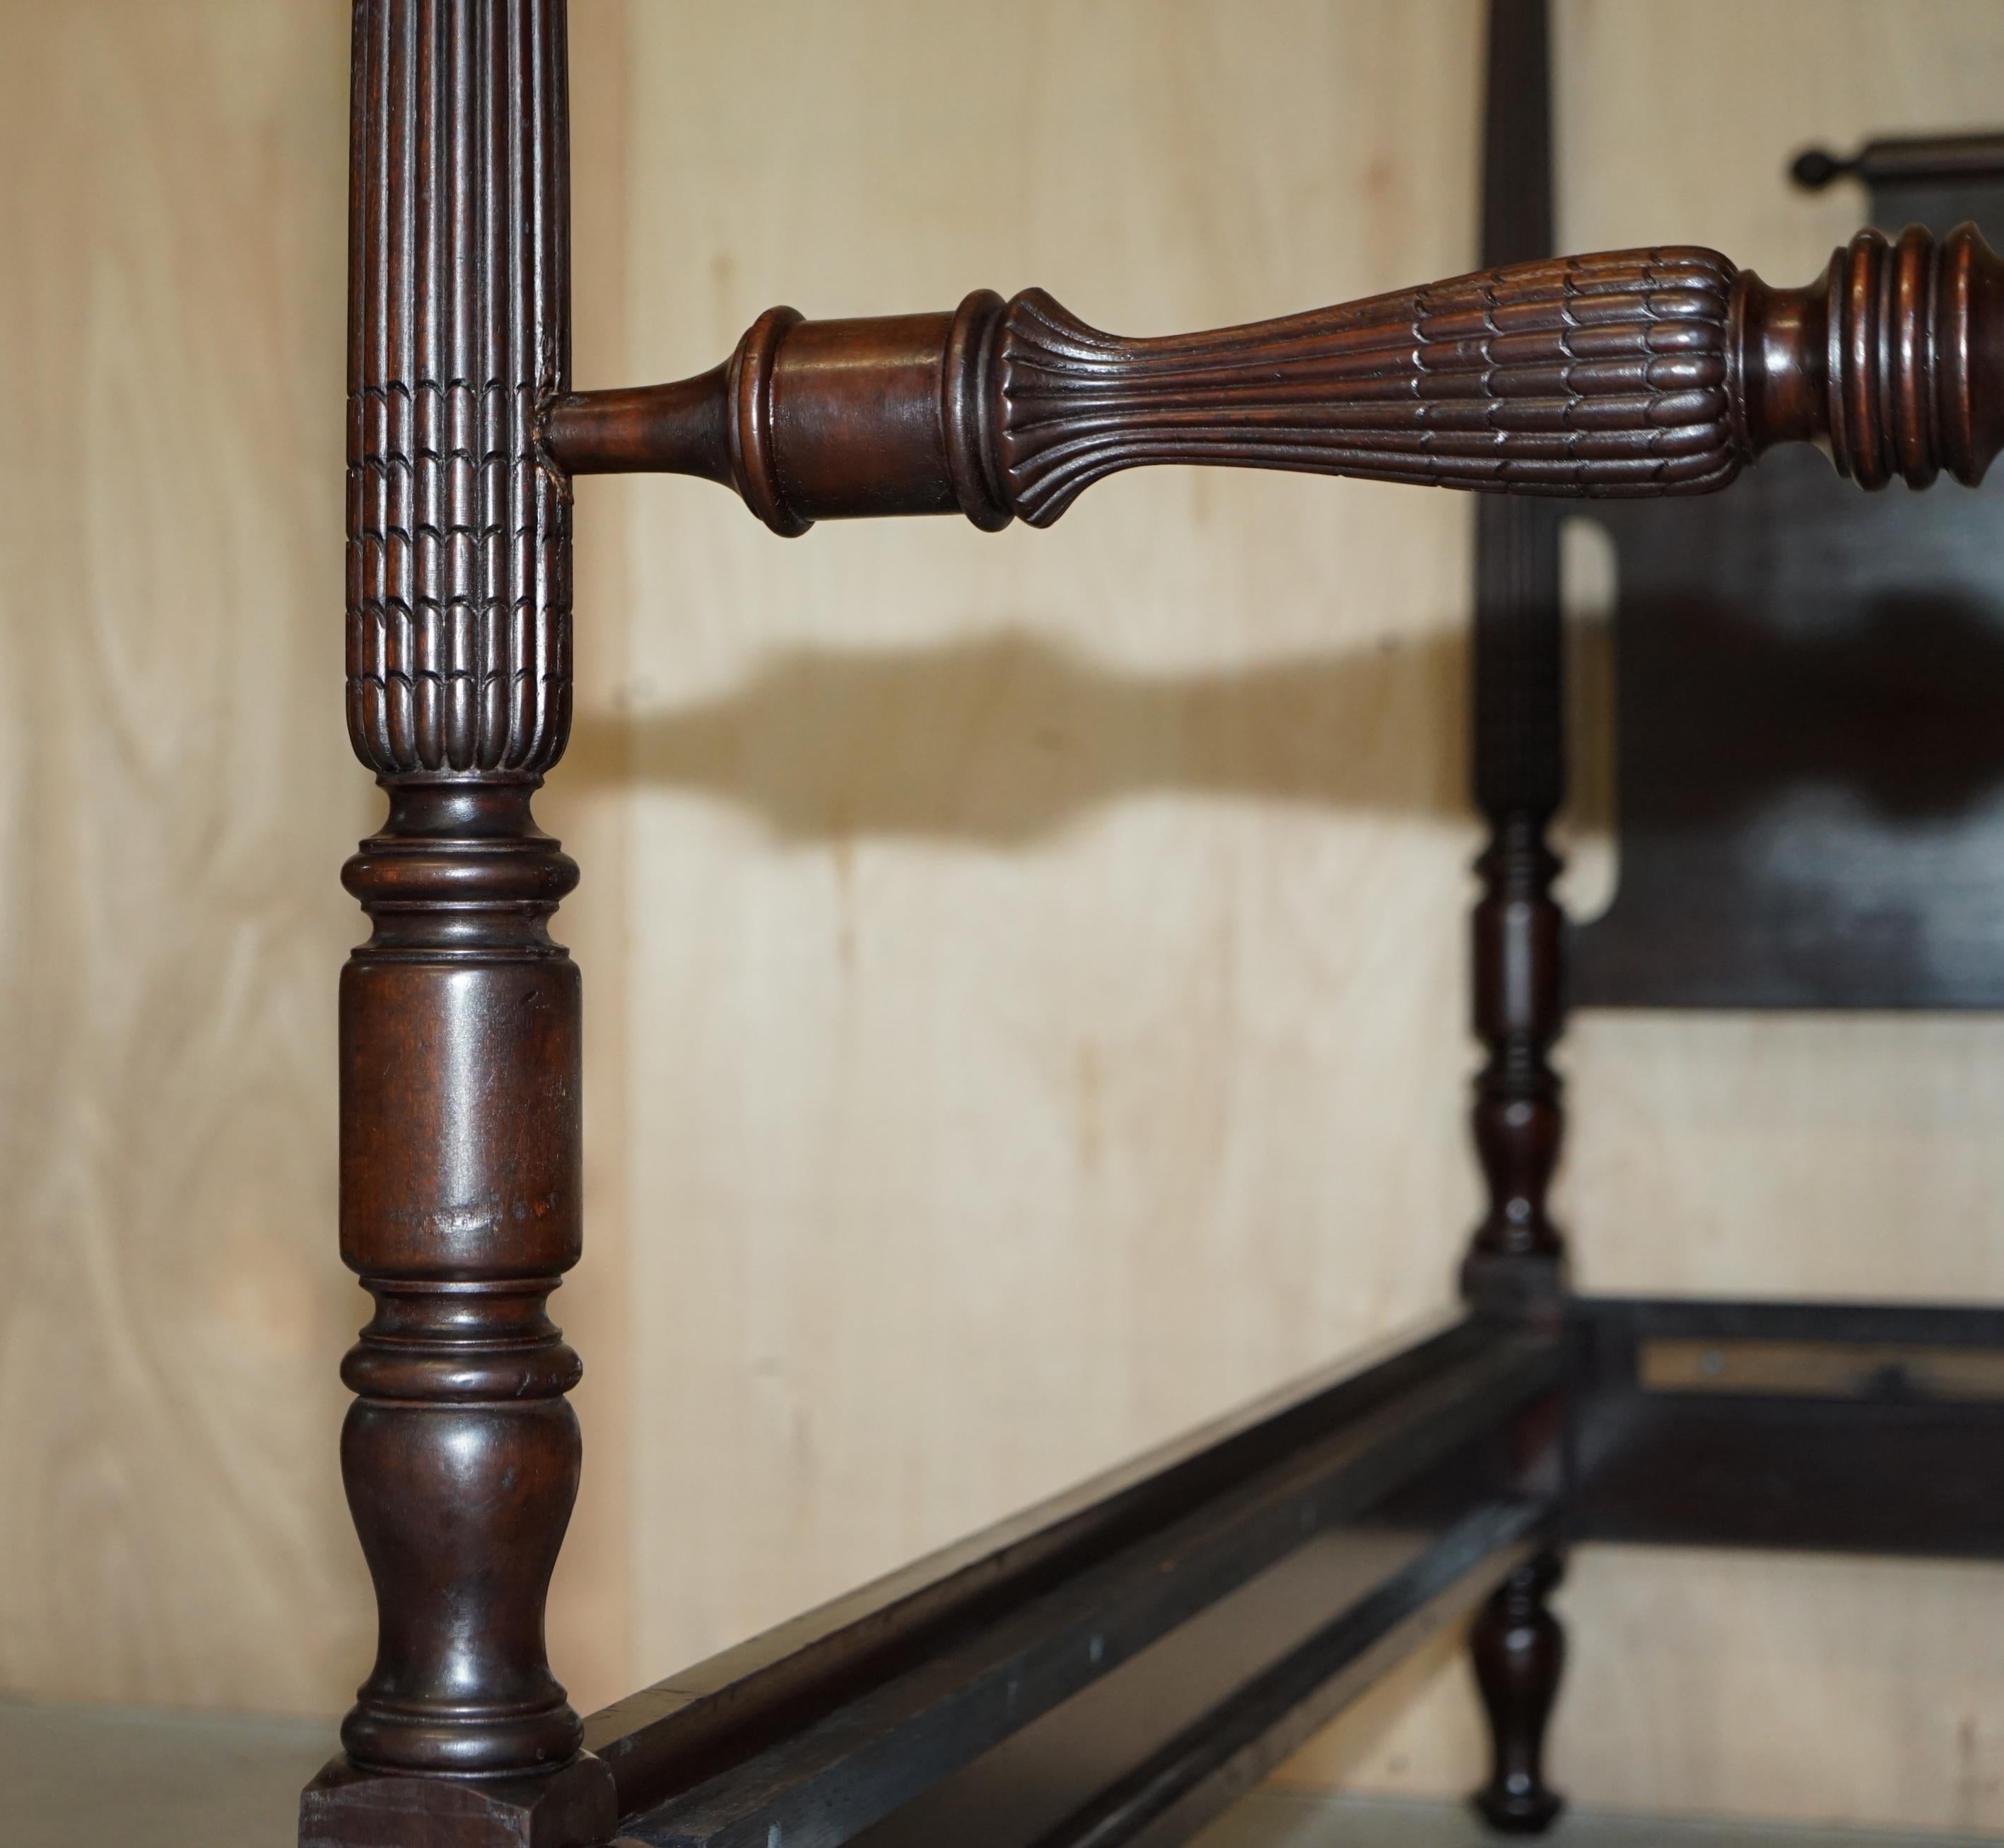 Georgian Circa 1800 American Federal Hardwood Four Poster Bed Frame with Carved Pillars For Sale